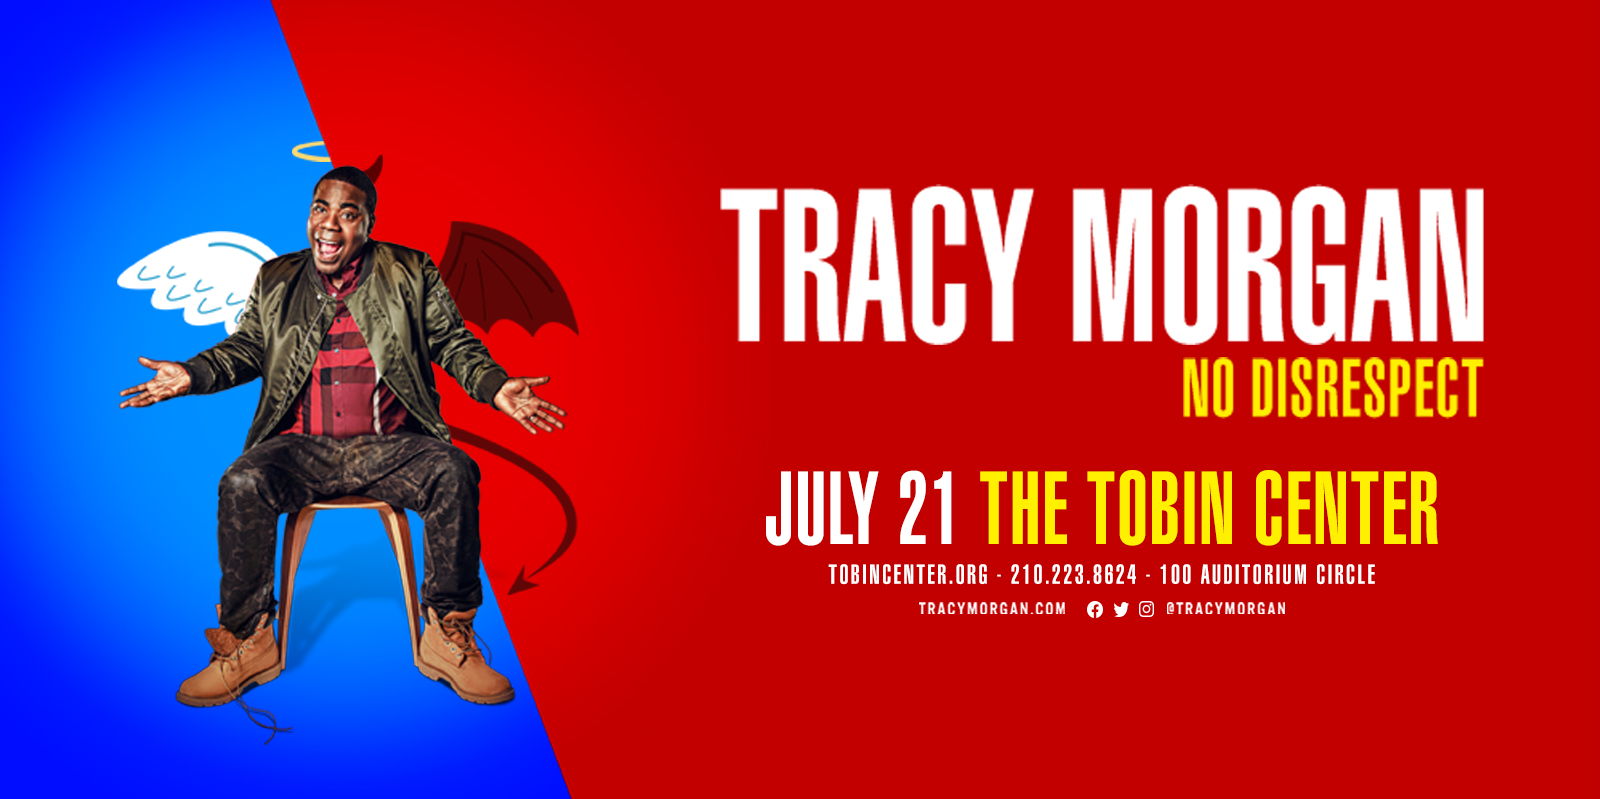 Tracy Morgan promotional image